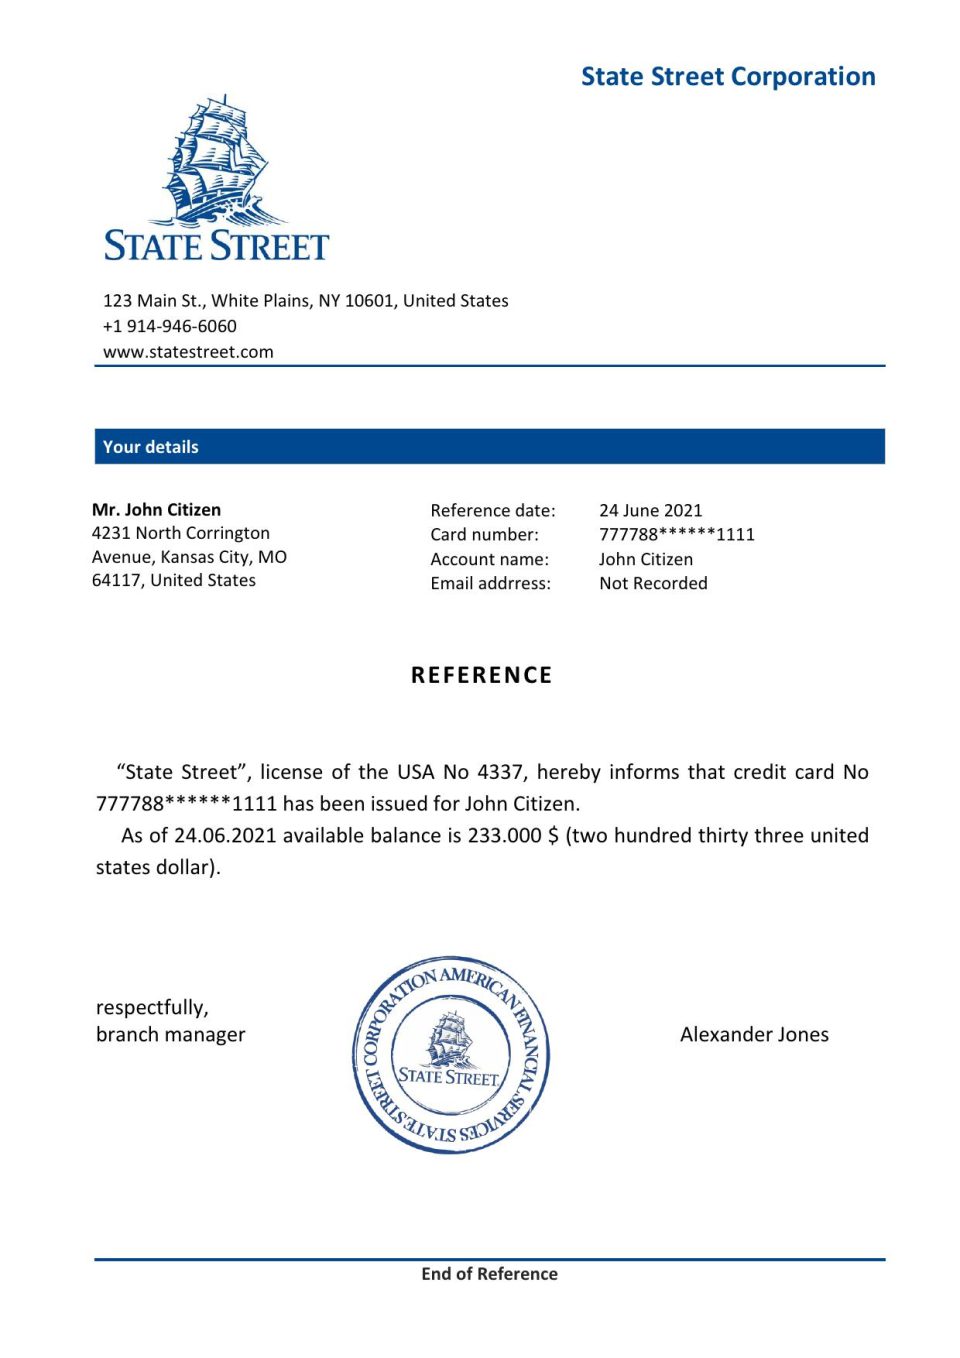 Download USA State Street Bank Reference Letter Templates | Editable Word